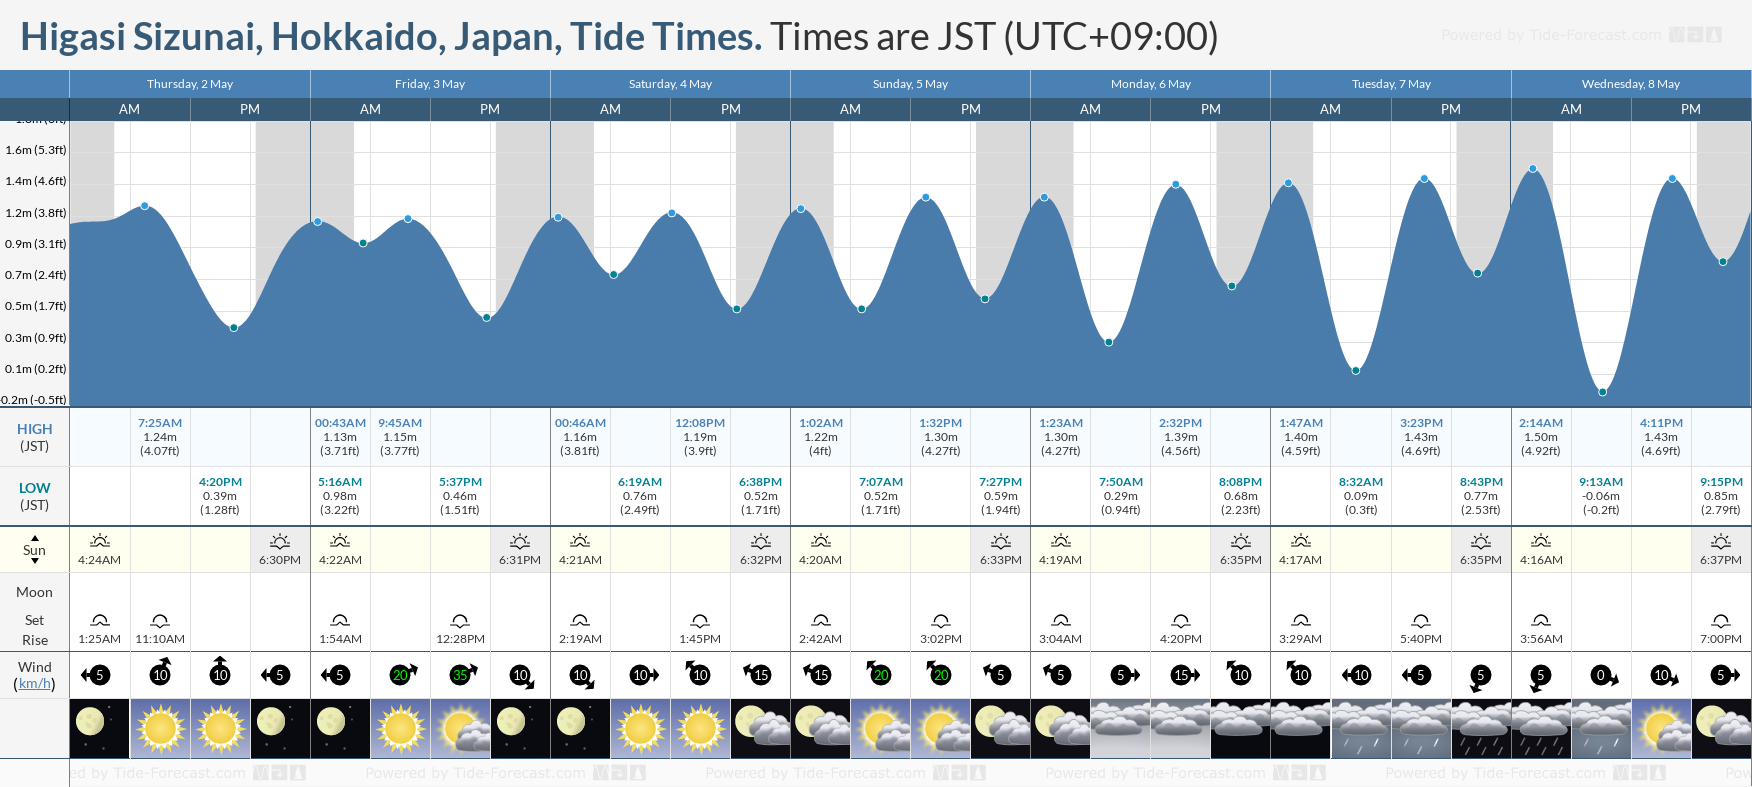 Higasi Sizunai, Hokkaido, Japan Tide Chart including high and low tide tide times for the next 7 days